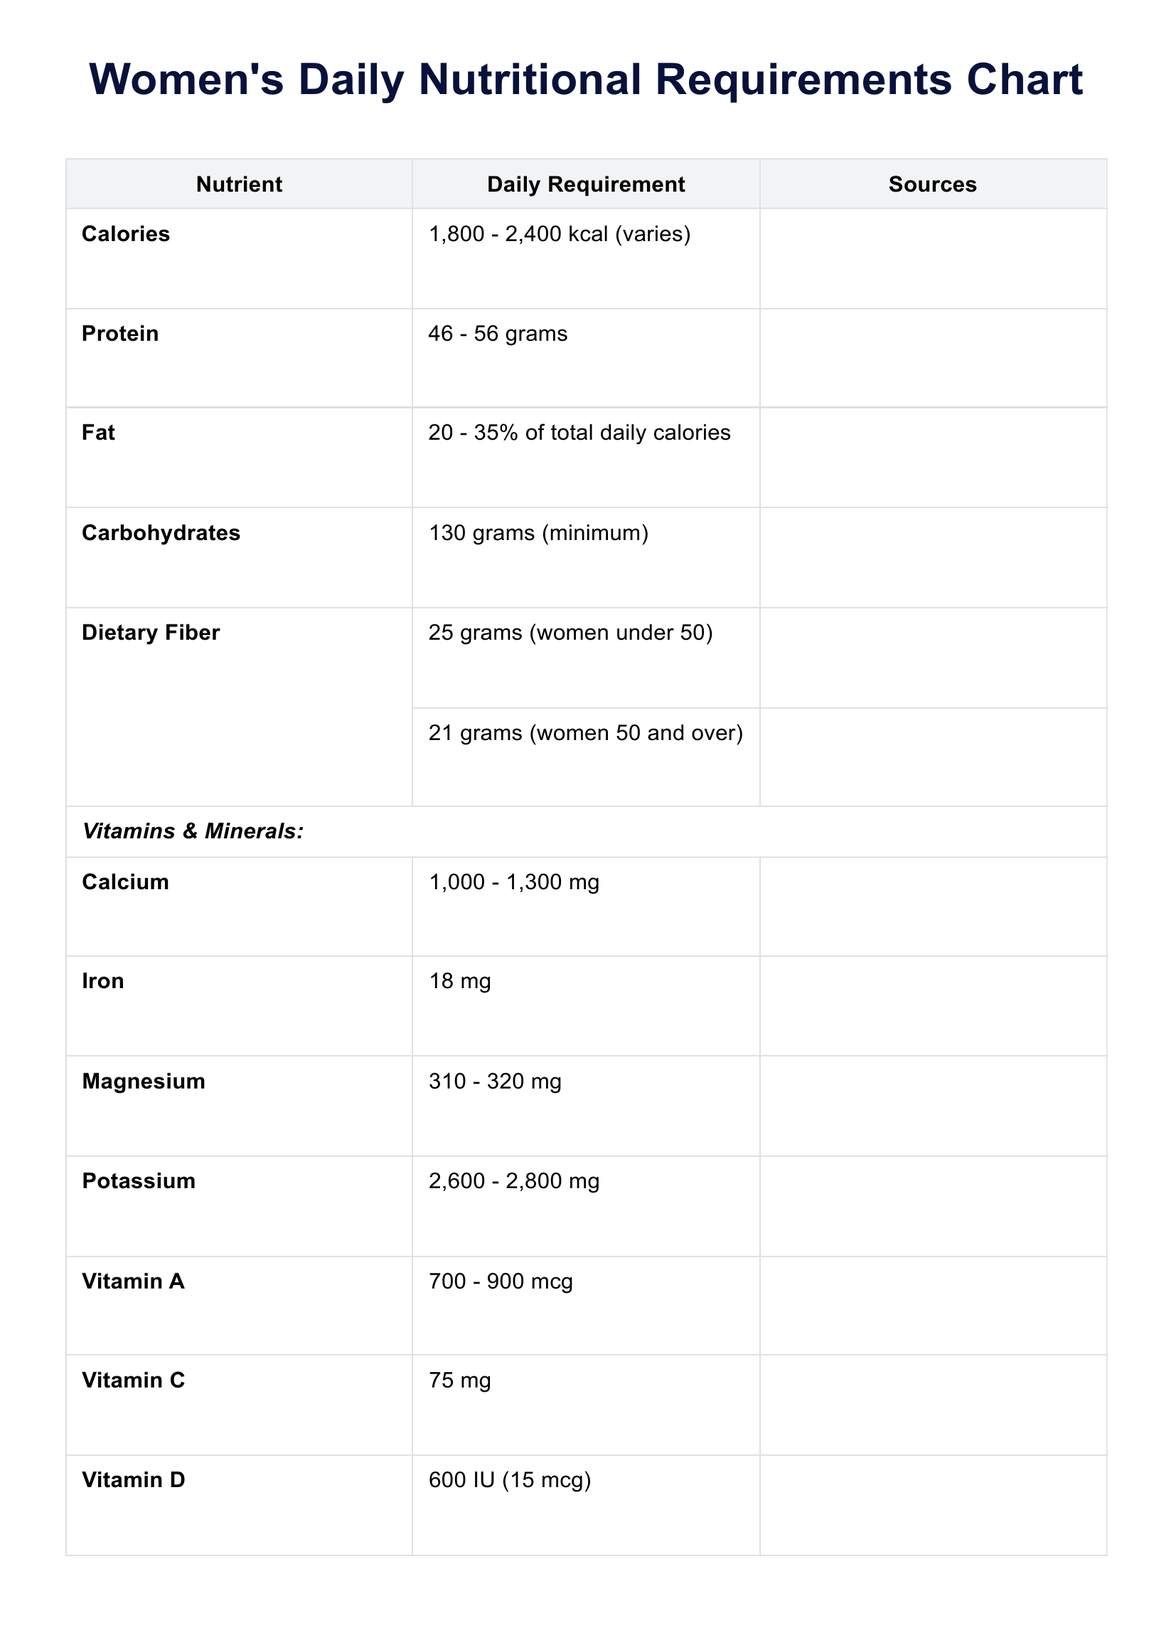 Women's Daily Nutritional Requirements Chart PDF Example